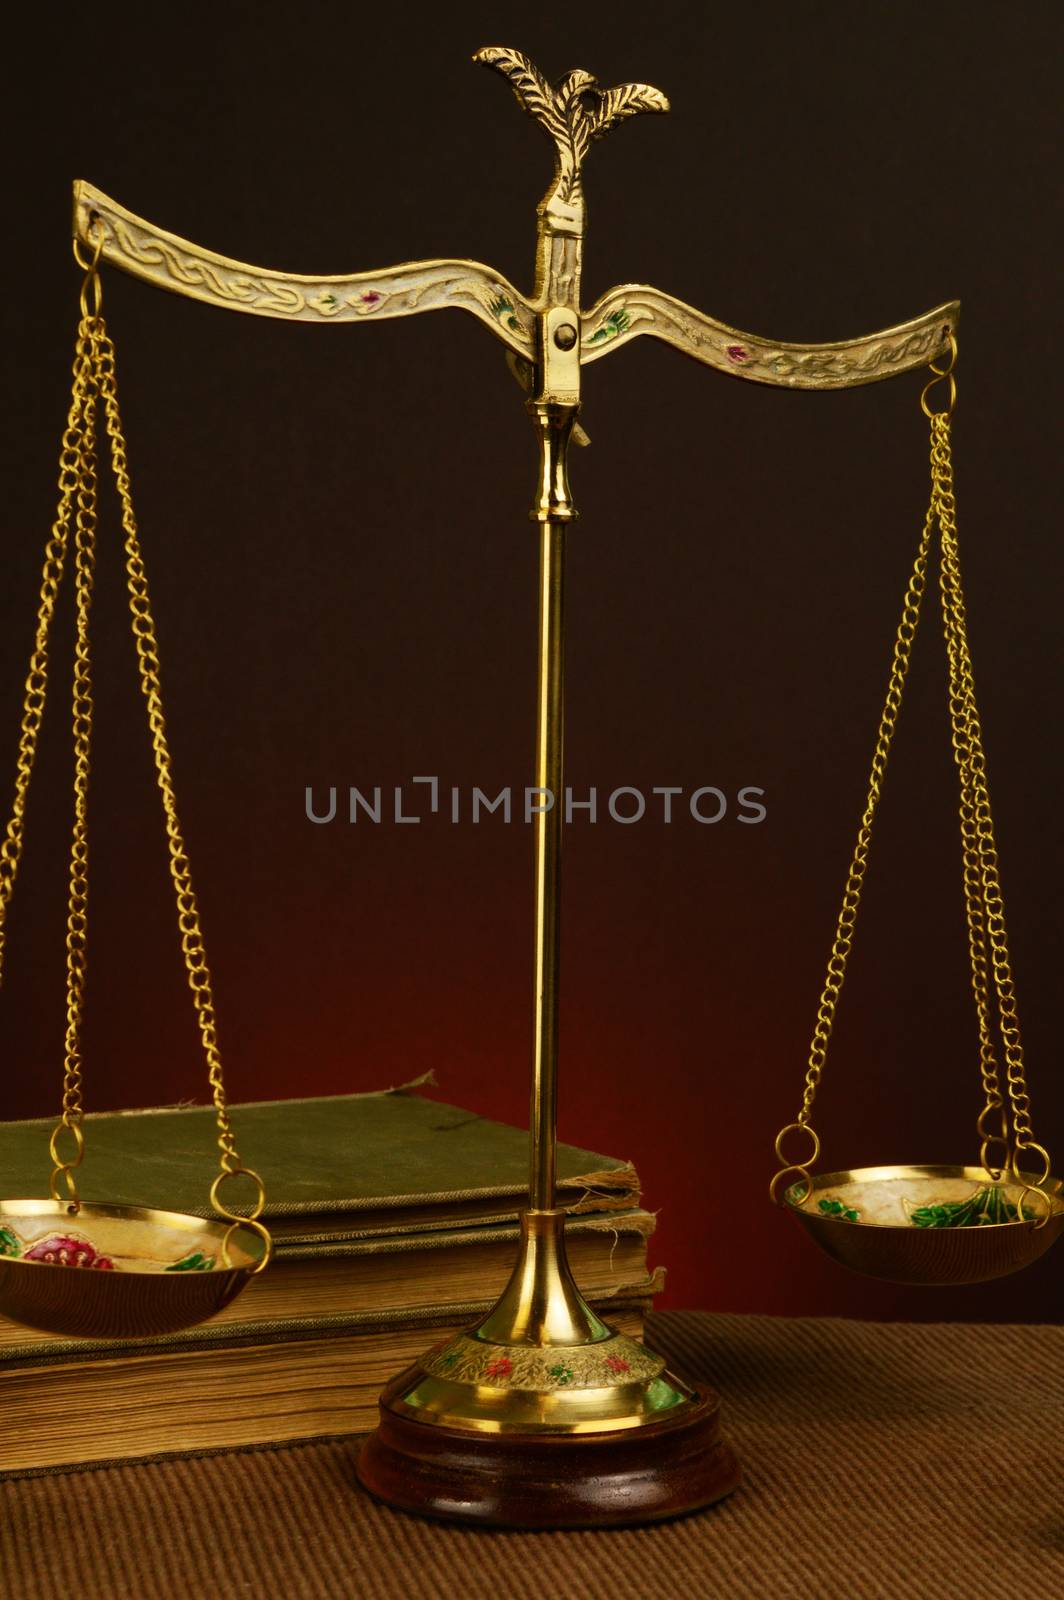 A vintage style image of an antique brass scale and books.